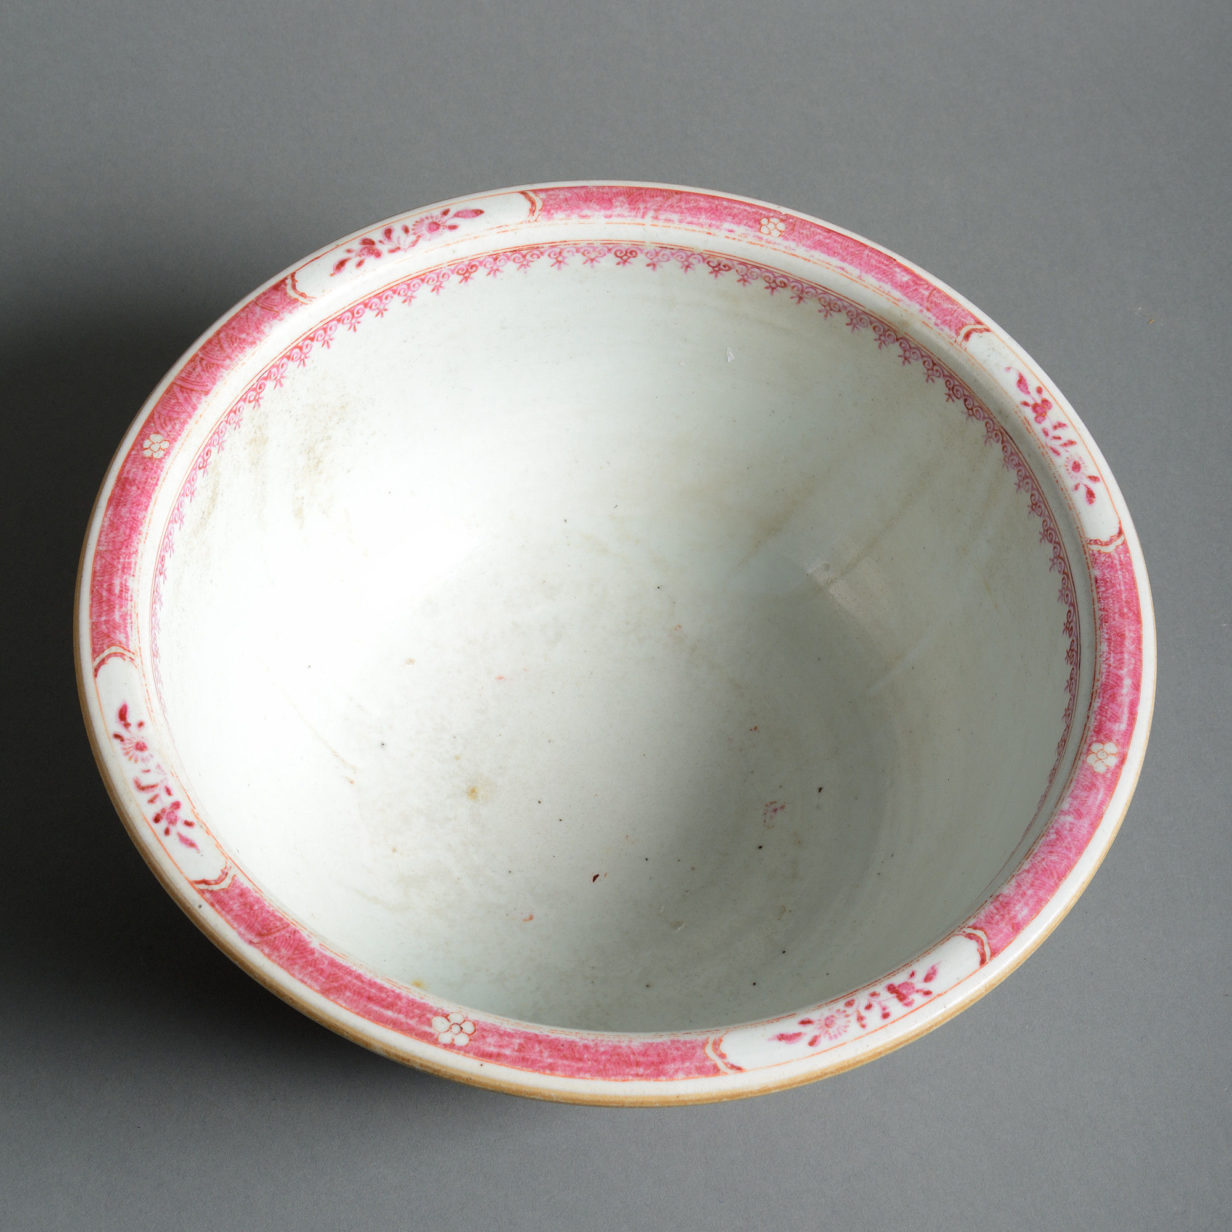 An Early 19th Century Famille Rose Porcelain Bowl